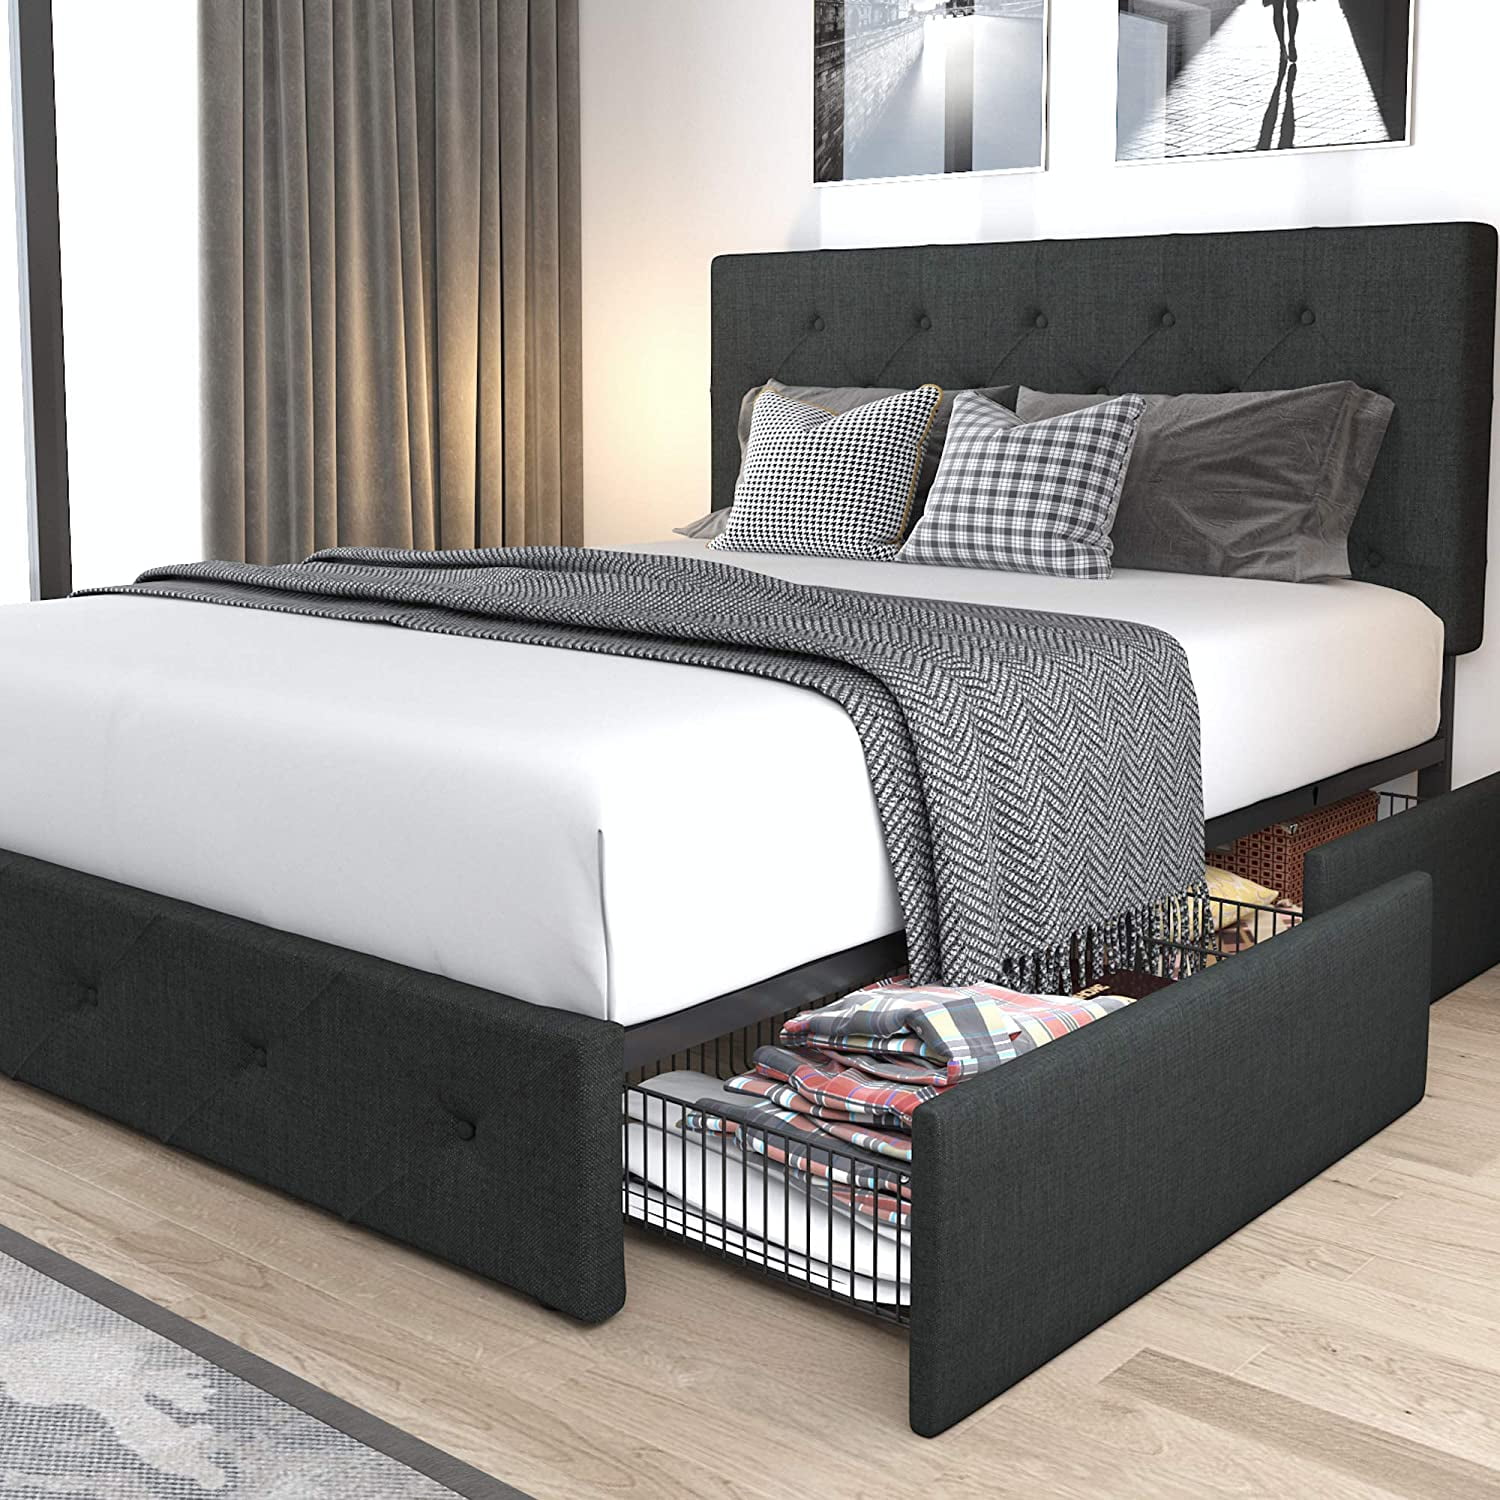 Allewie Queen Platform Bed Frame With 4, Full Platform Bed With Storage And Headboard